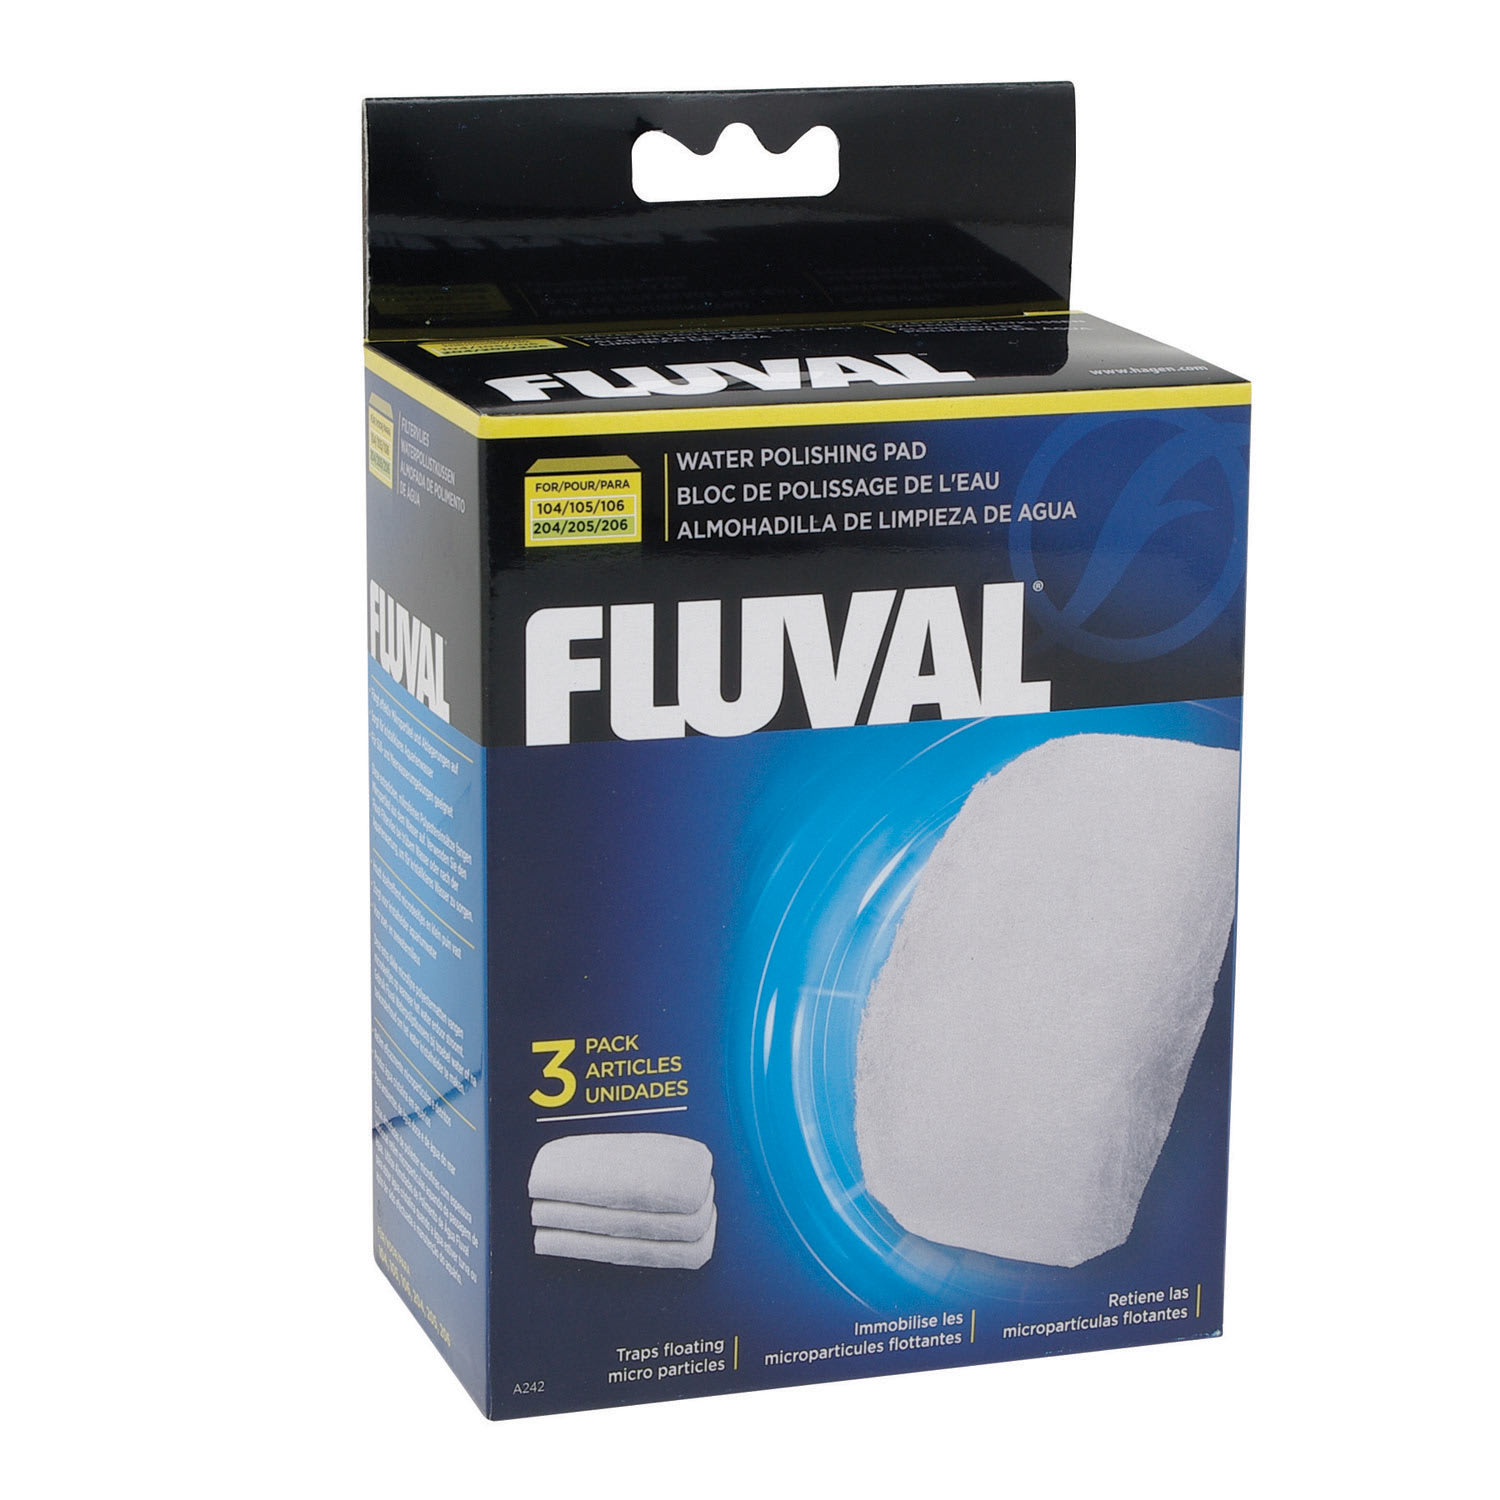 Fluval 3 Plus 4 pack Filter Water Polishing Pad A191 A-191